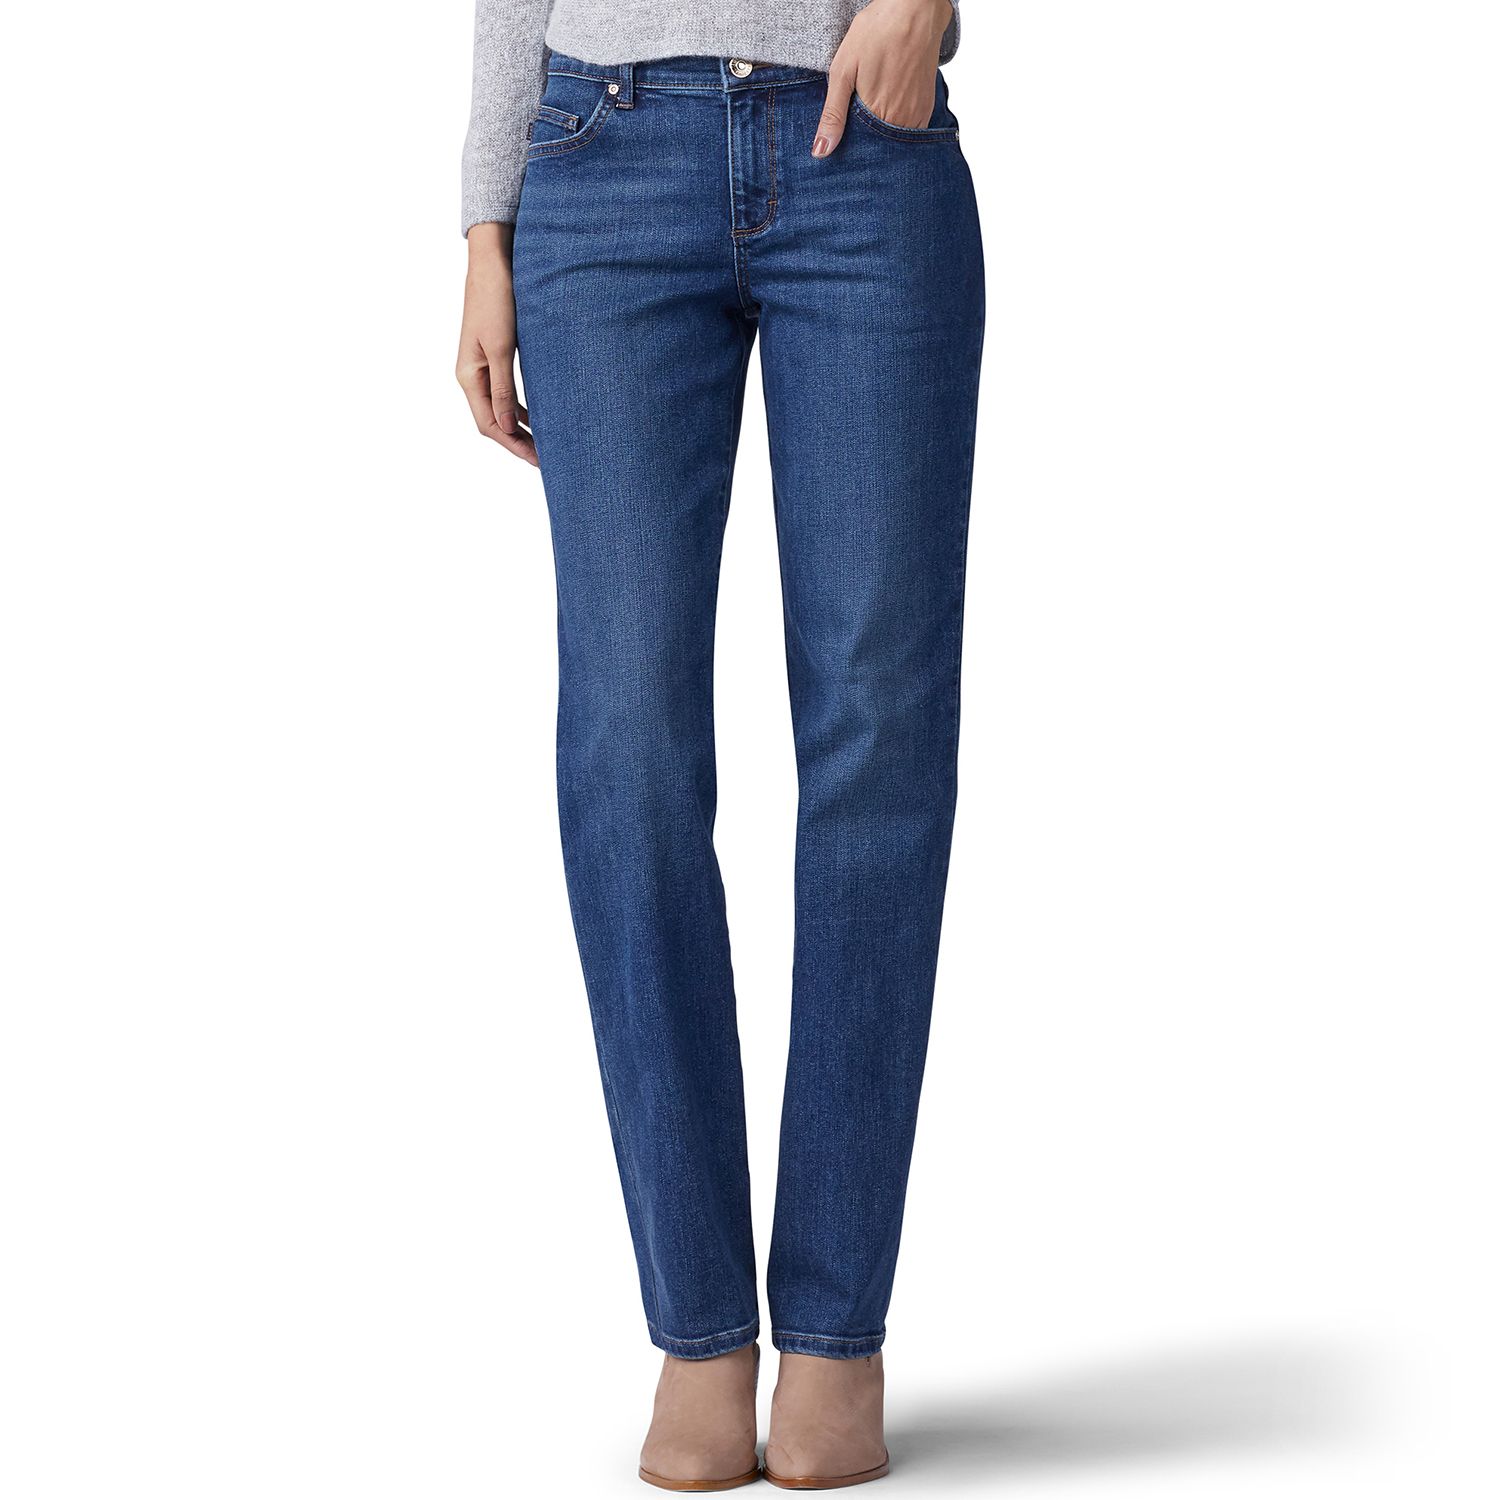 lee relaxed fit jeans womens petite